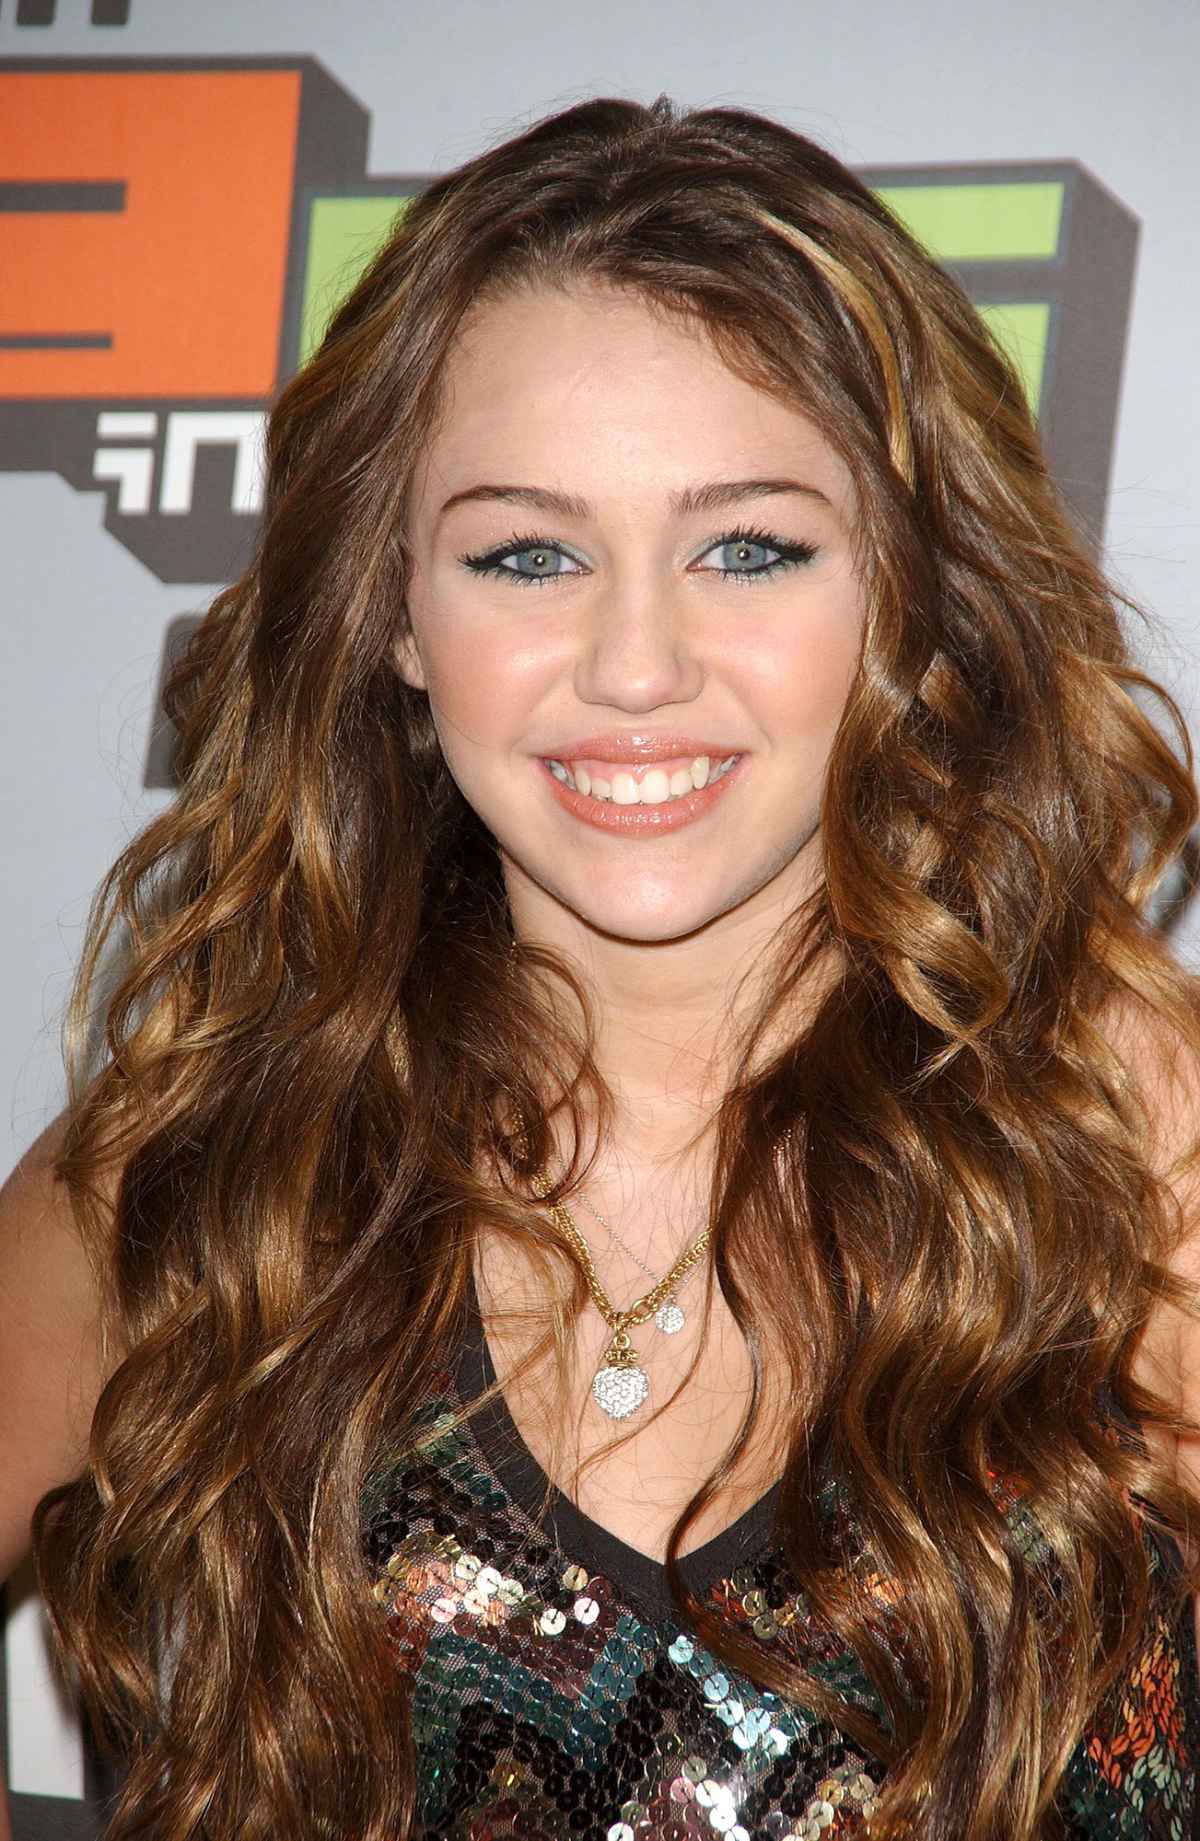 Bikini Shemale Miley Cyrus - Miley Cyrus Says Public Judges Her Well-Being Based on Her Hair